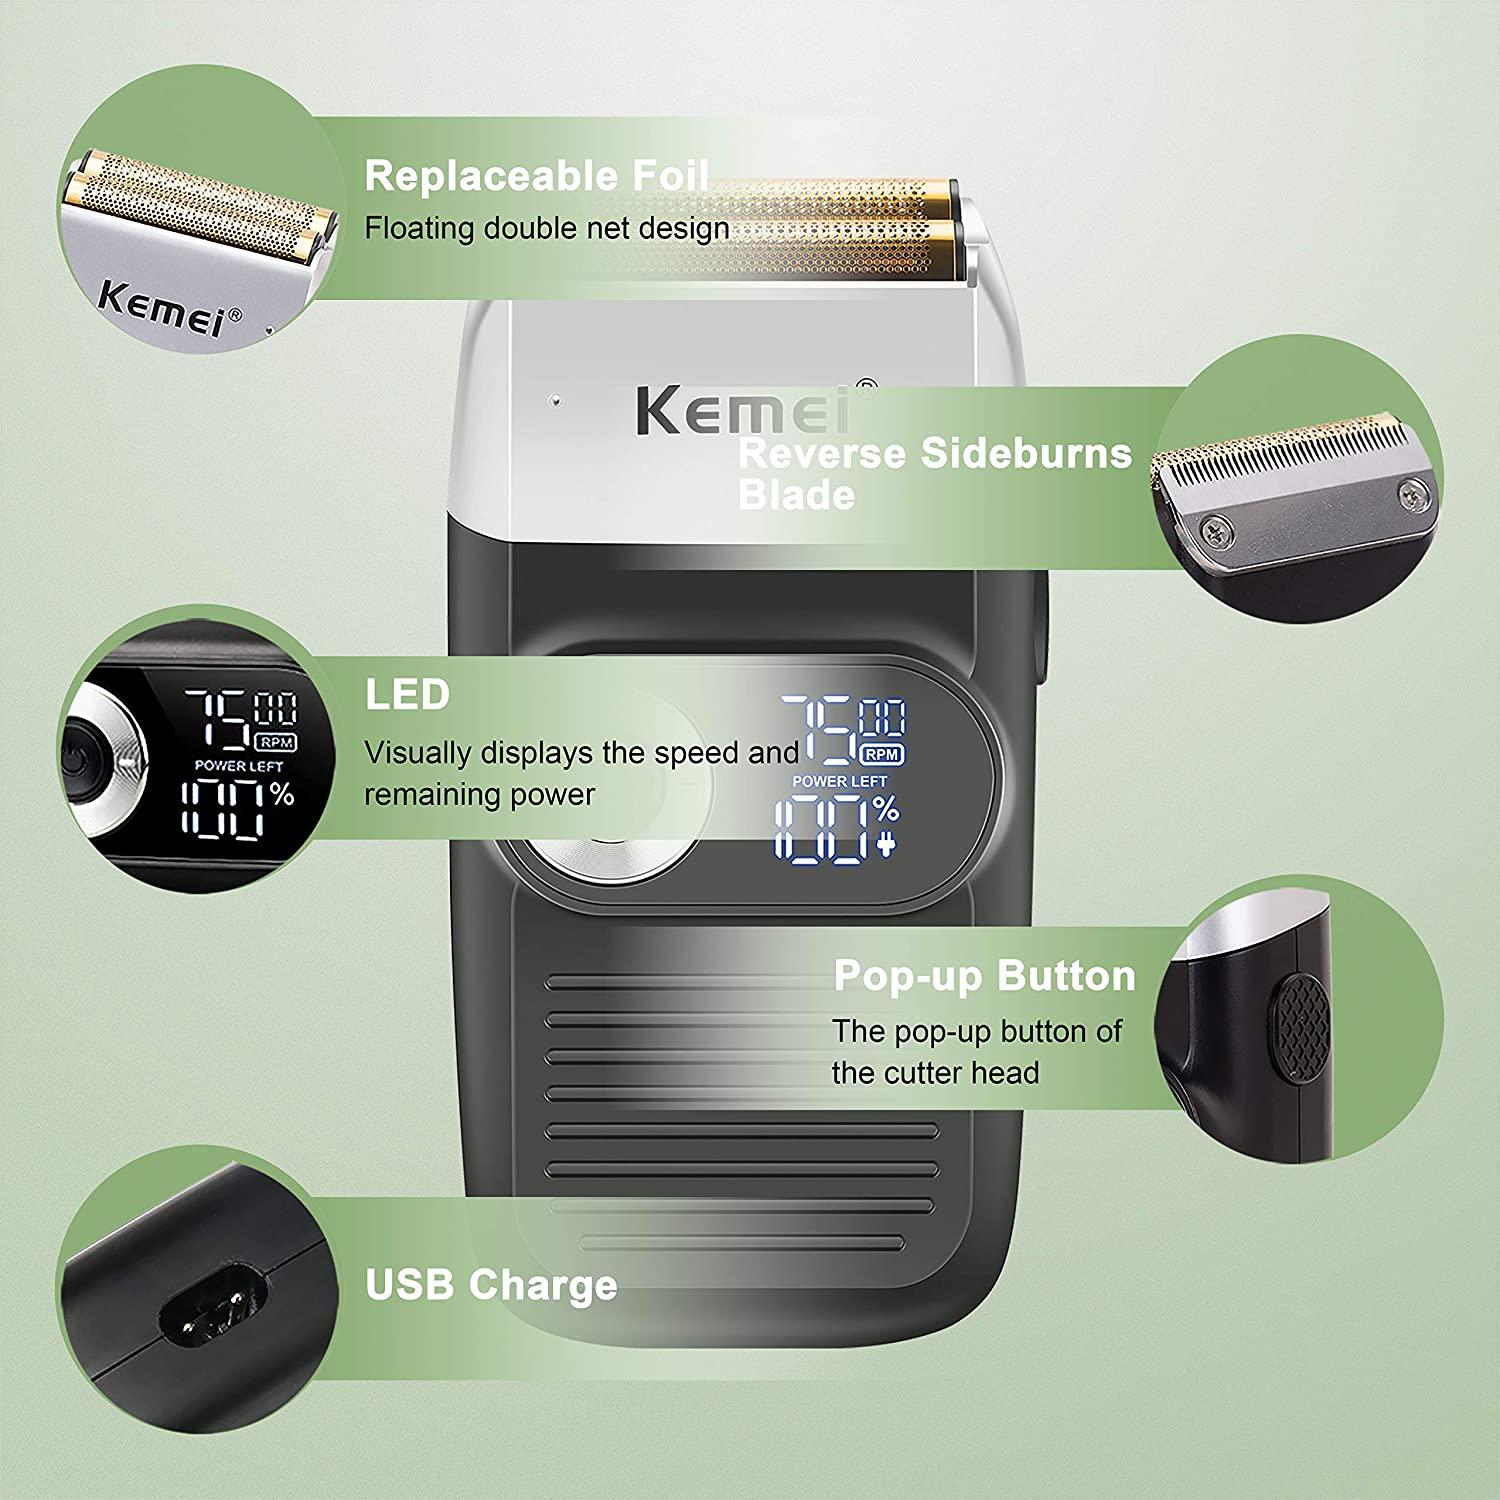 KEMEI Electric foil Shavers for Men, LCD Display Cordless Men's Razors, USB  Rechargeable with Pop-up